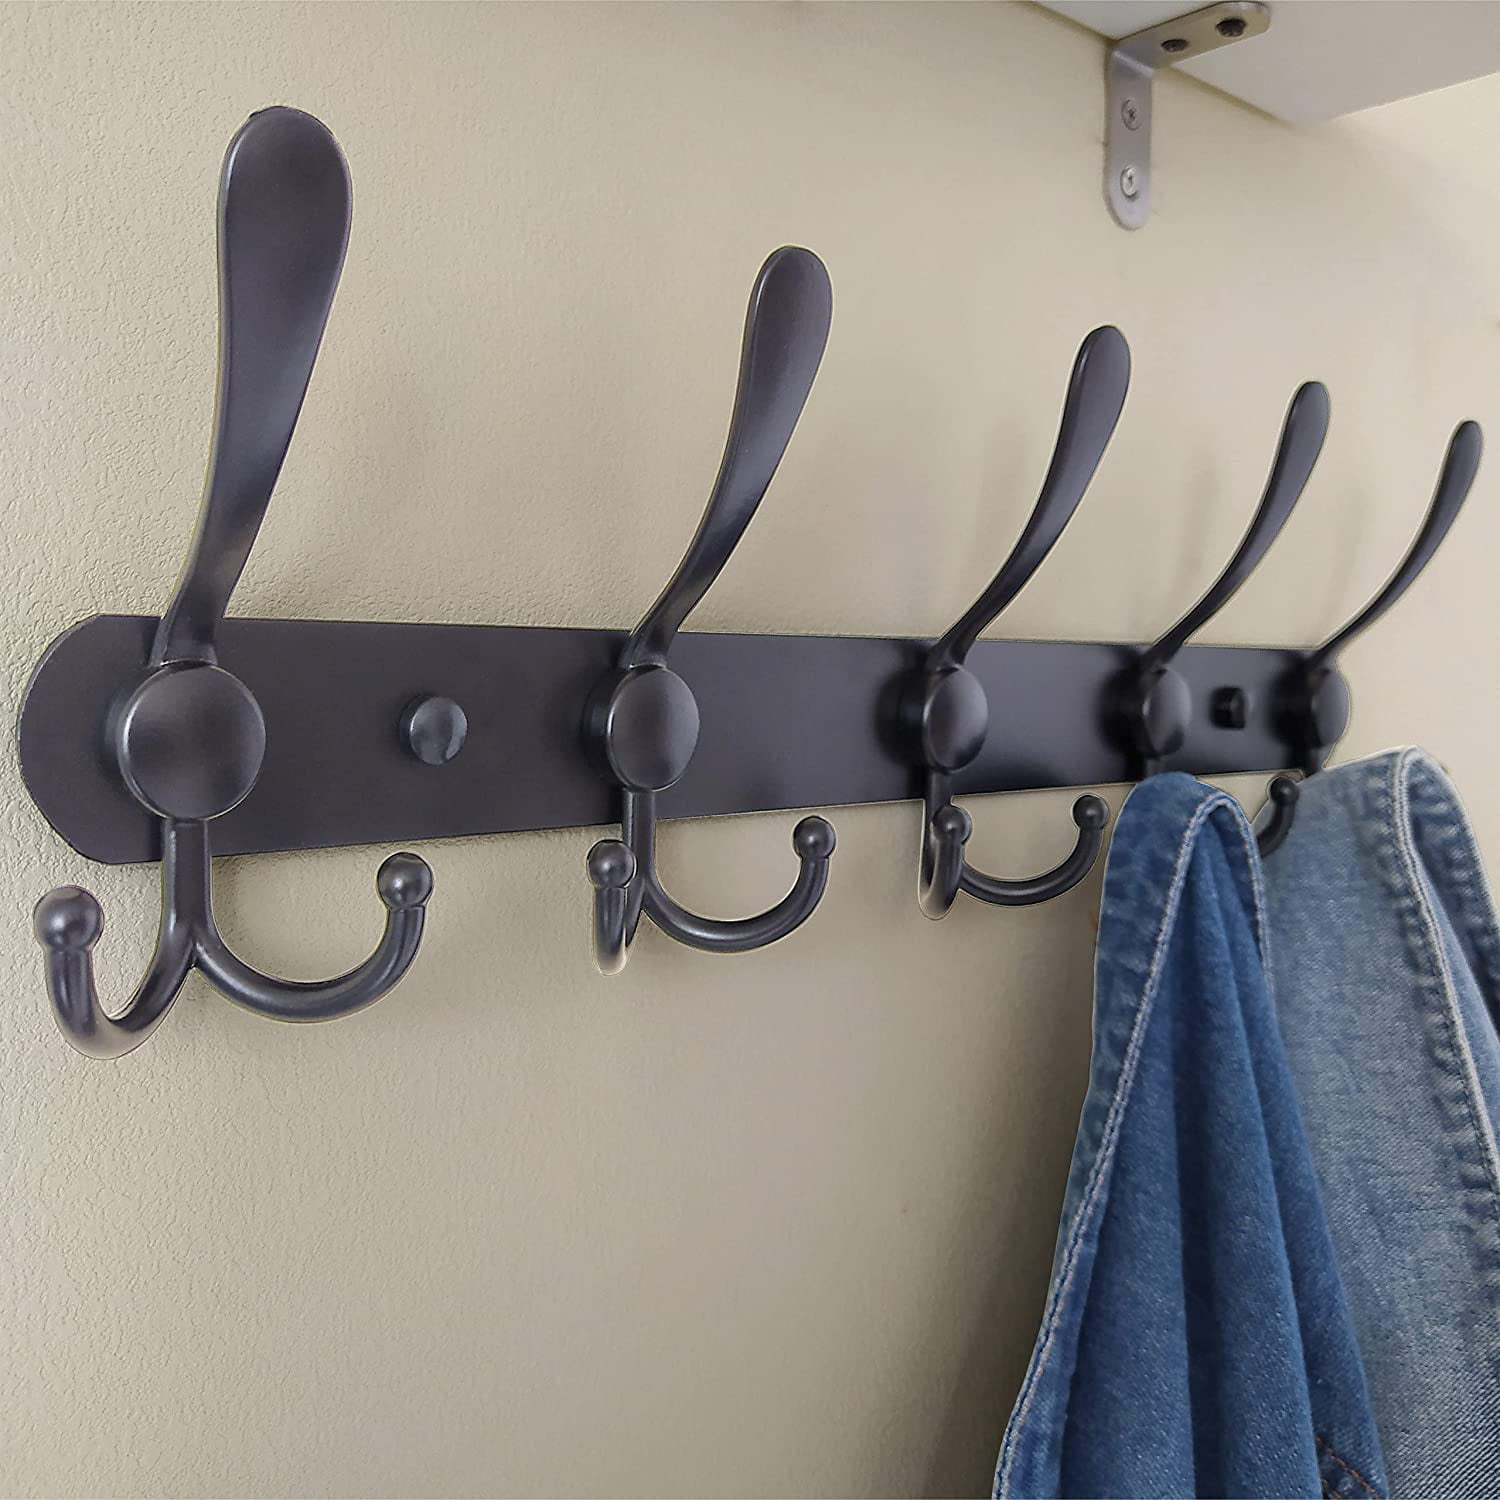 Dseap Wall Mounted Coat Rack: 16 Hole to Hole, Coat Hook Hanger with 5  Metal Hooks for Hanging Coats Towels Hats Clothes,Light Walnult